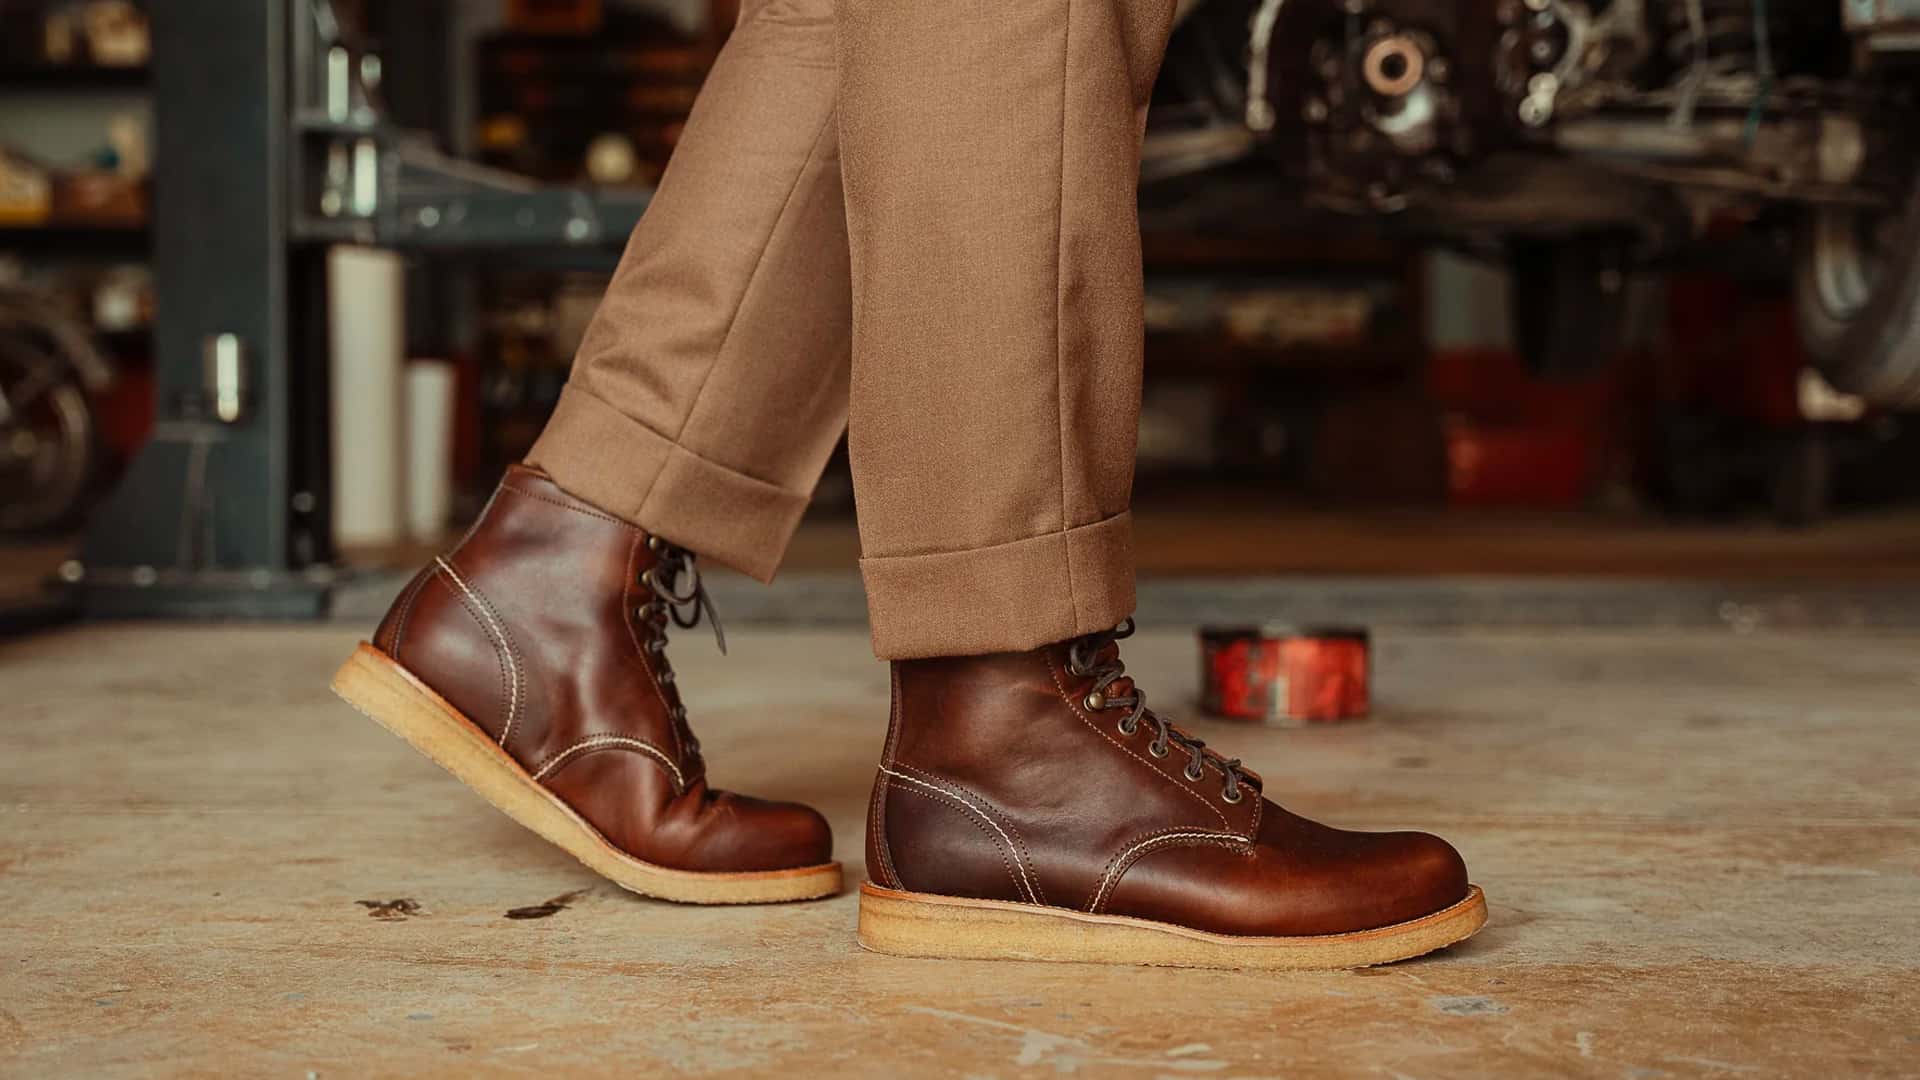 10 Stylish Shoes & Boots That Will Make You Look Taller